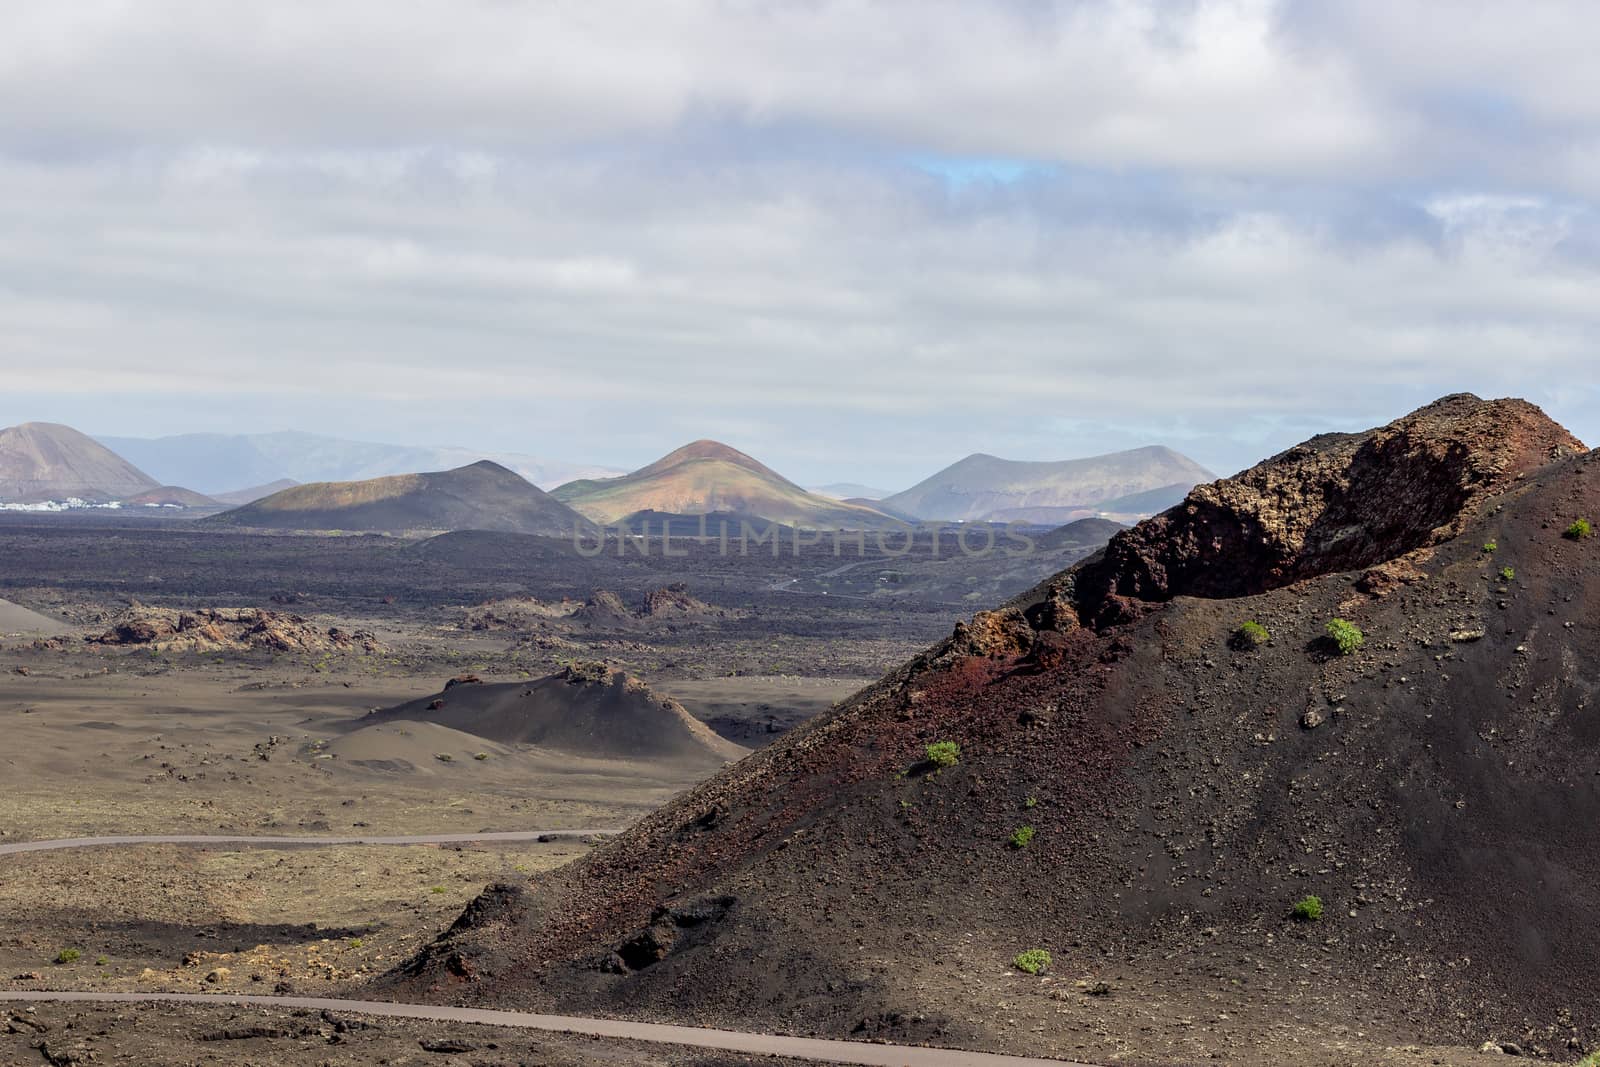 View at multi colored volcanic landscape in Timanfaya Nationalpark on canary island Lanzarote, Spain 